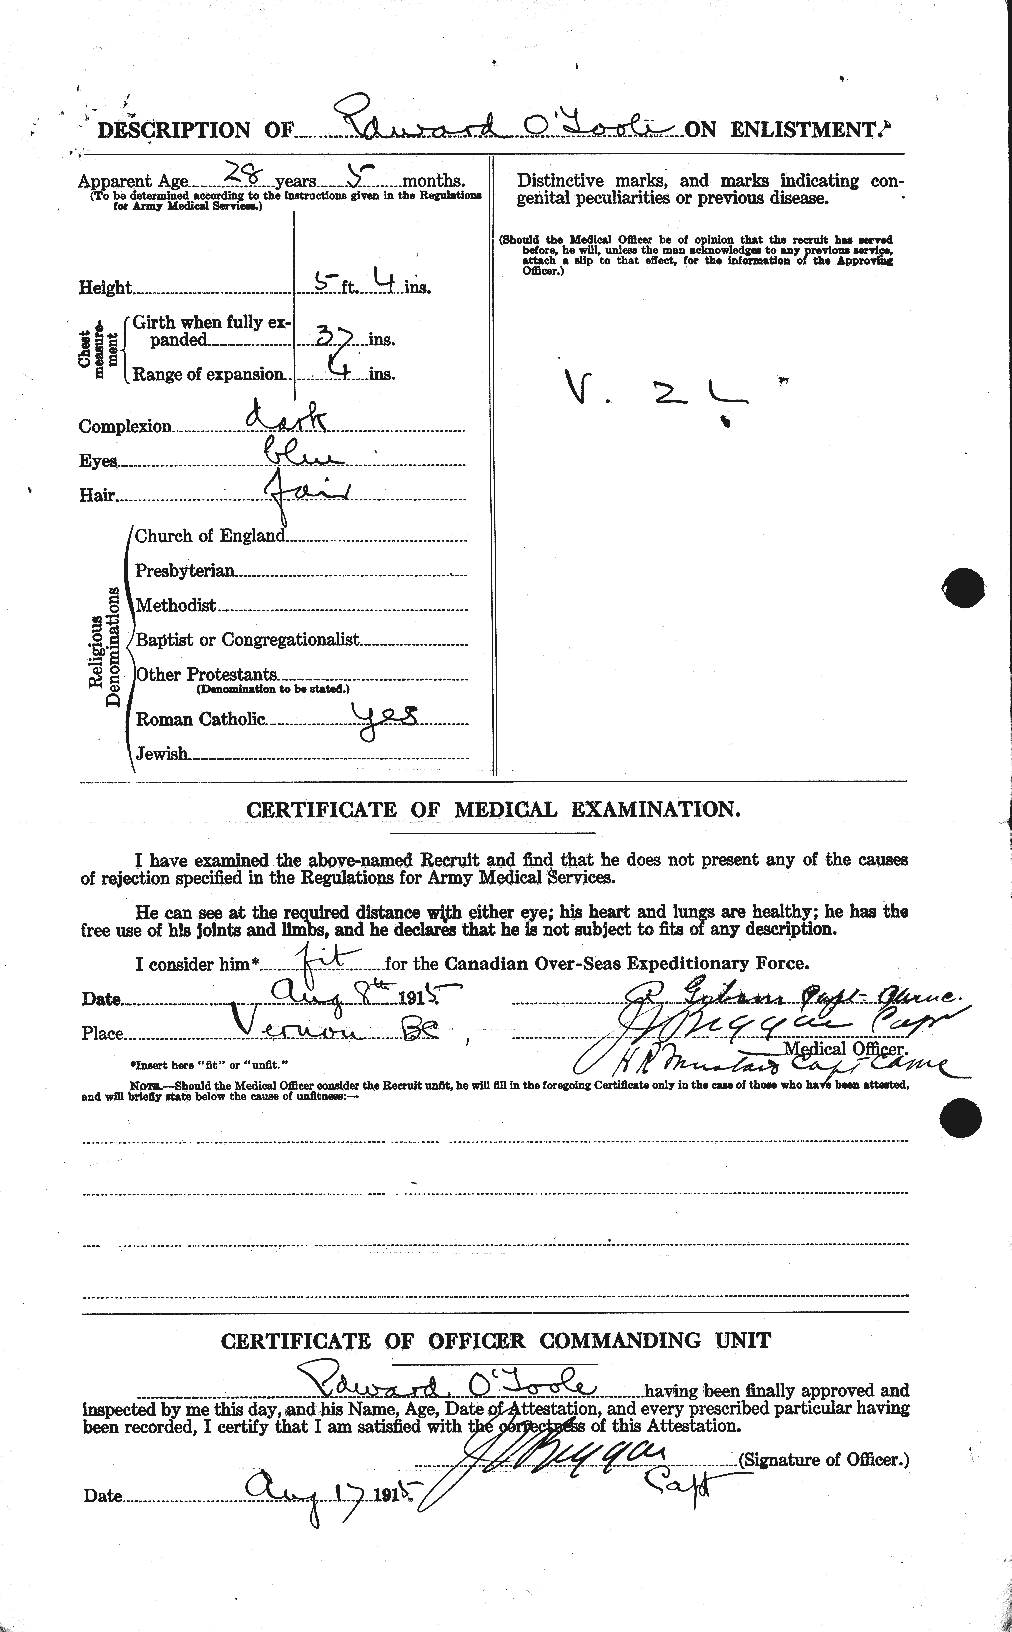 Personnel Records of the First World War - CEF 560424b